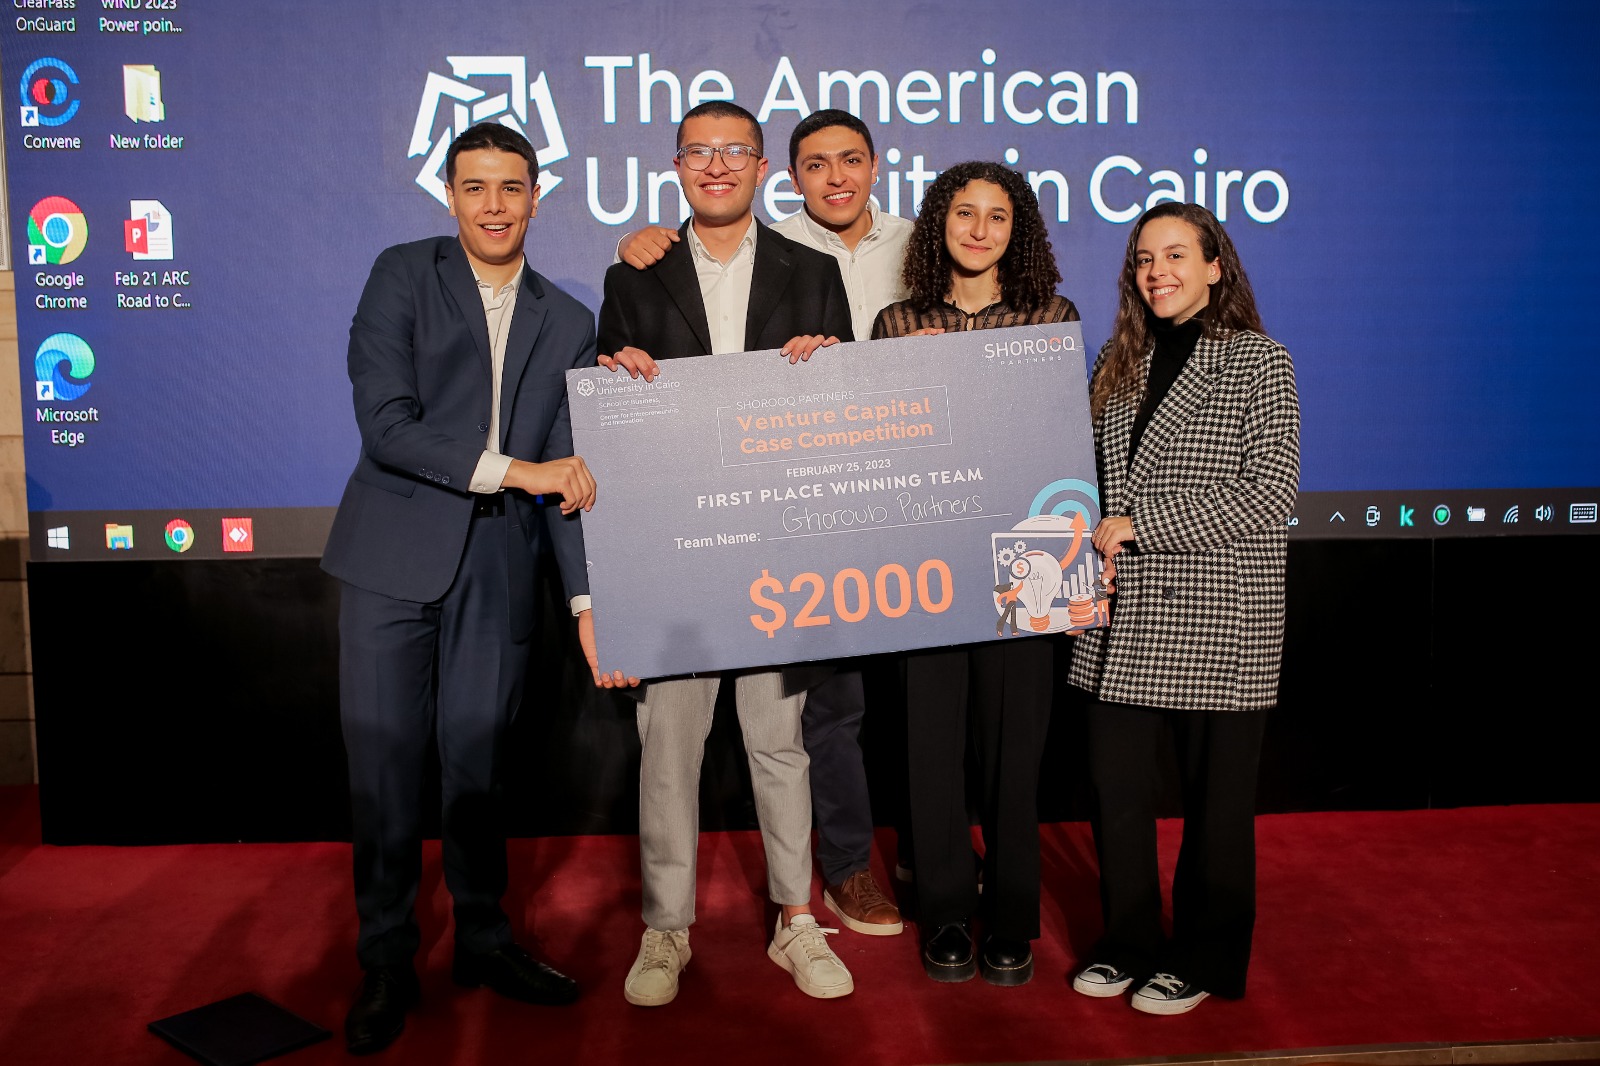 students standing on stage with a giant check for $2000